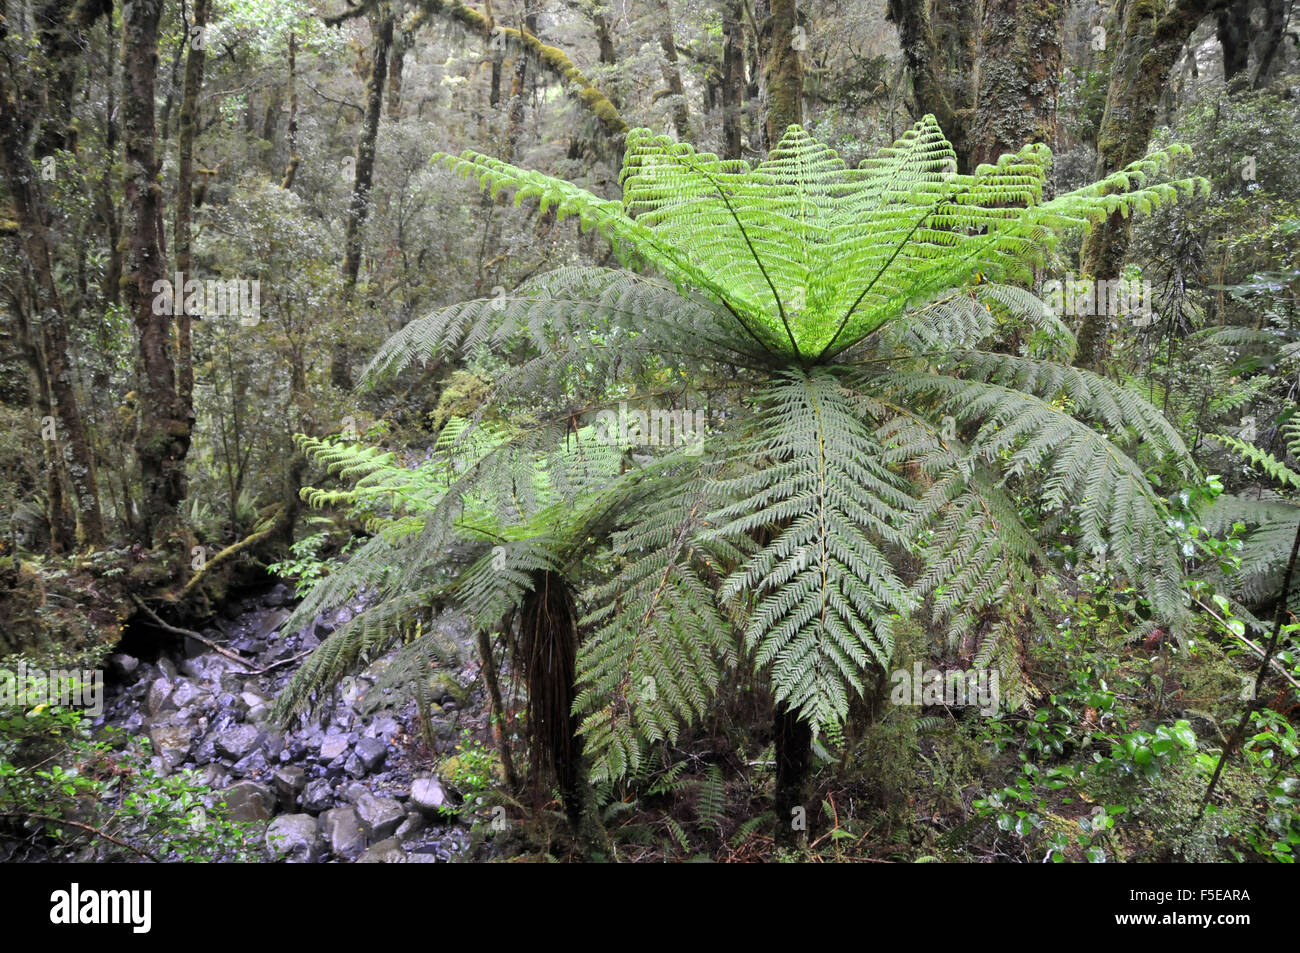 Fern forest, The Chasm, Milford sound, Fiordland National Park, South Island, New Zealand Stock Photo